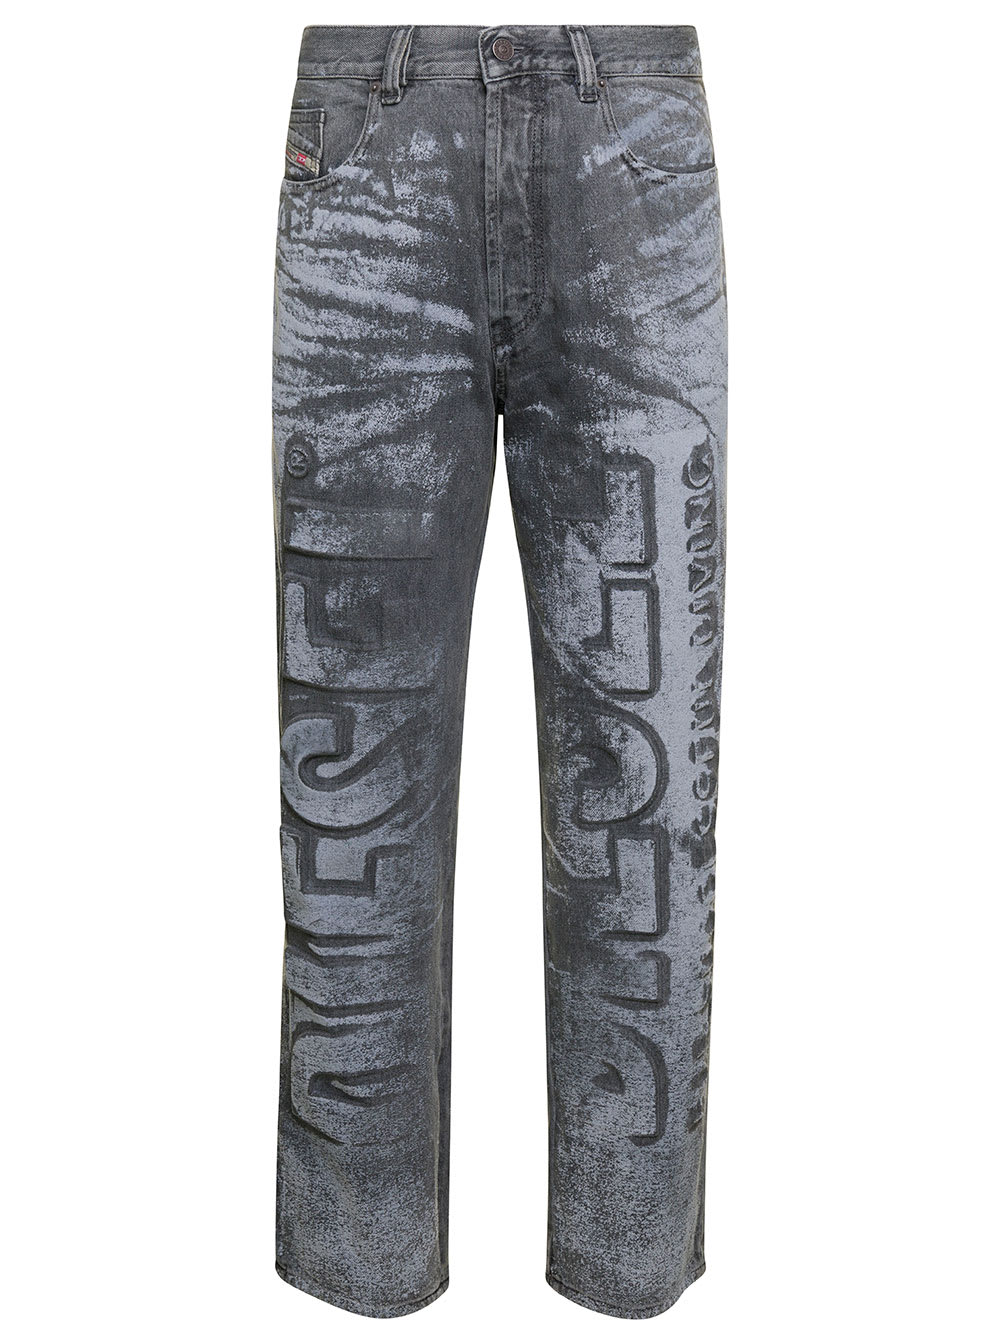 DIESEL GREY STRAIGHT JEANS WITH BLEACHED EFFECT AND LOGO LETTERING PRINT IN COTTON BLEND DENIM MAN